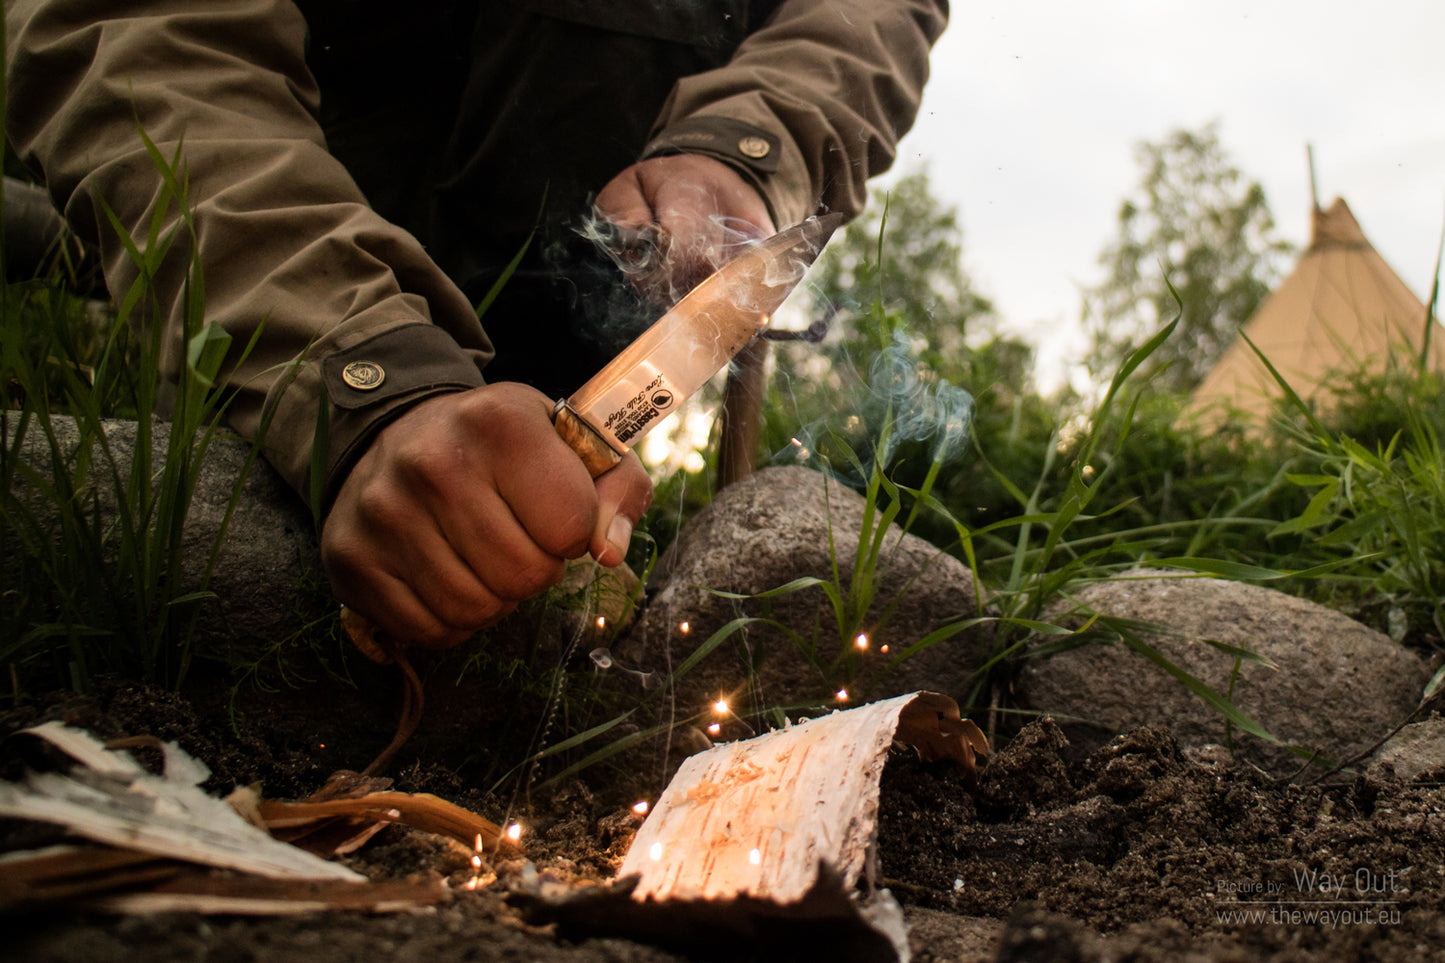 Using a Casström fire steel and Lars Fält knife to create sparks for making a fire